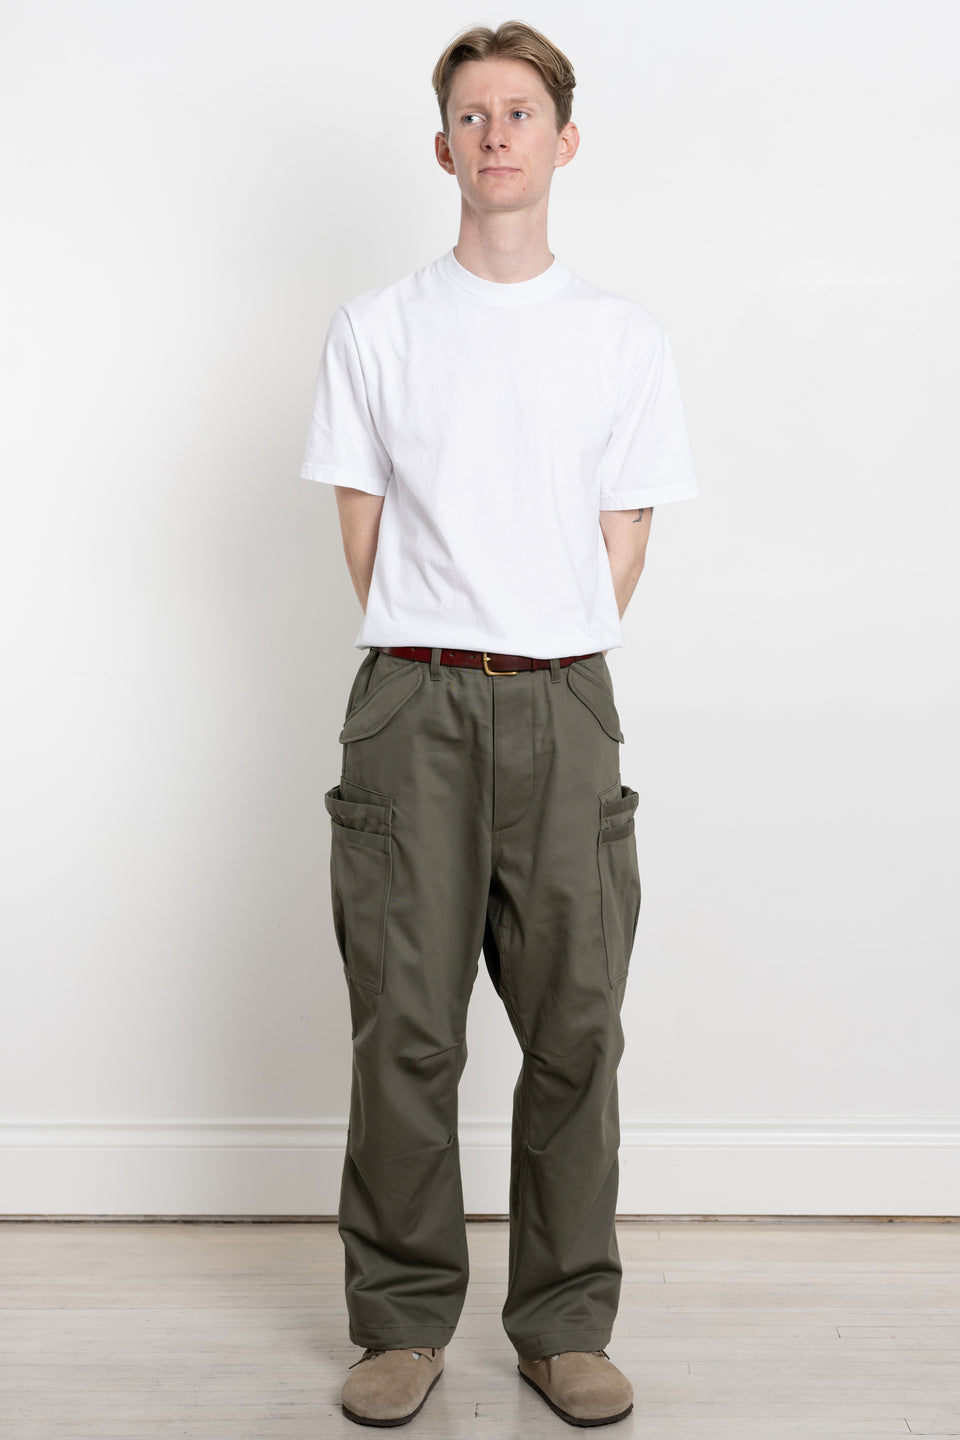 Sassafras Japan 23AW FW23 Men's Collection Overgrown Pants Military Satin Olive Calculus Victoria BC Canada